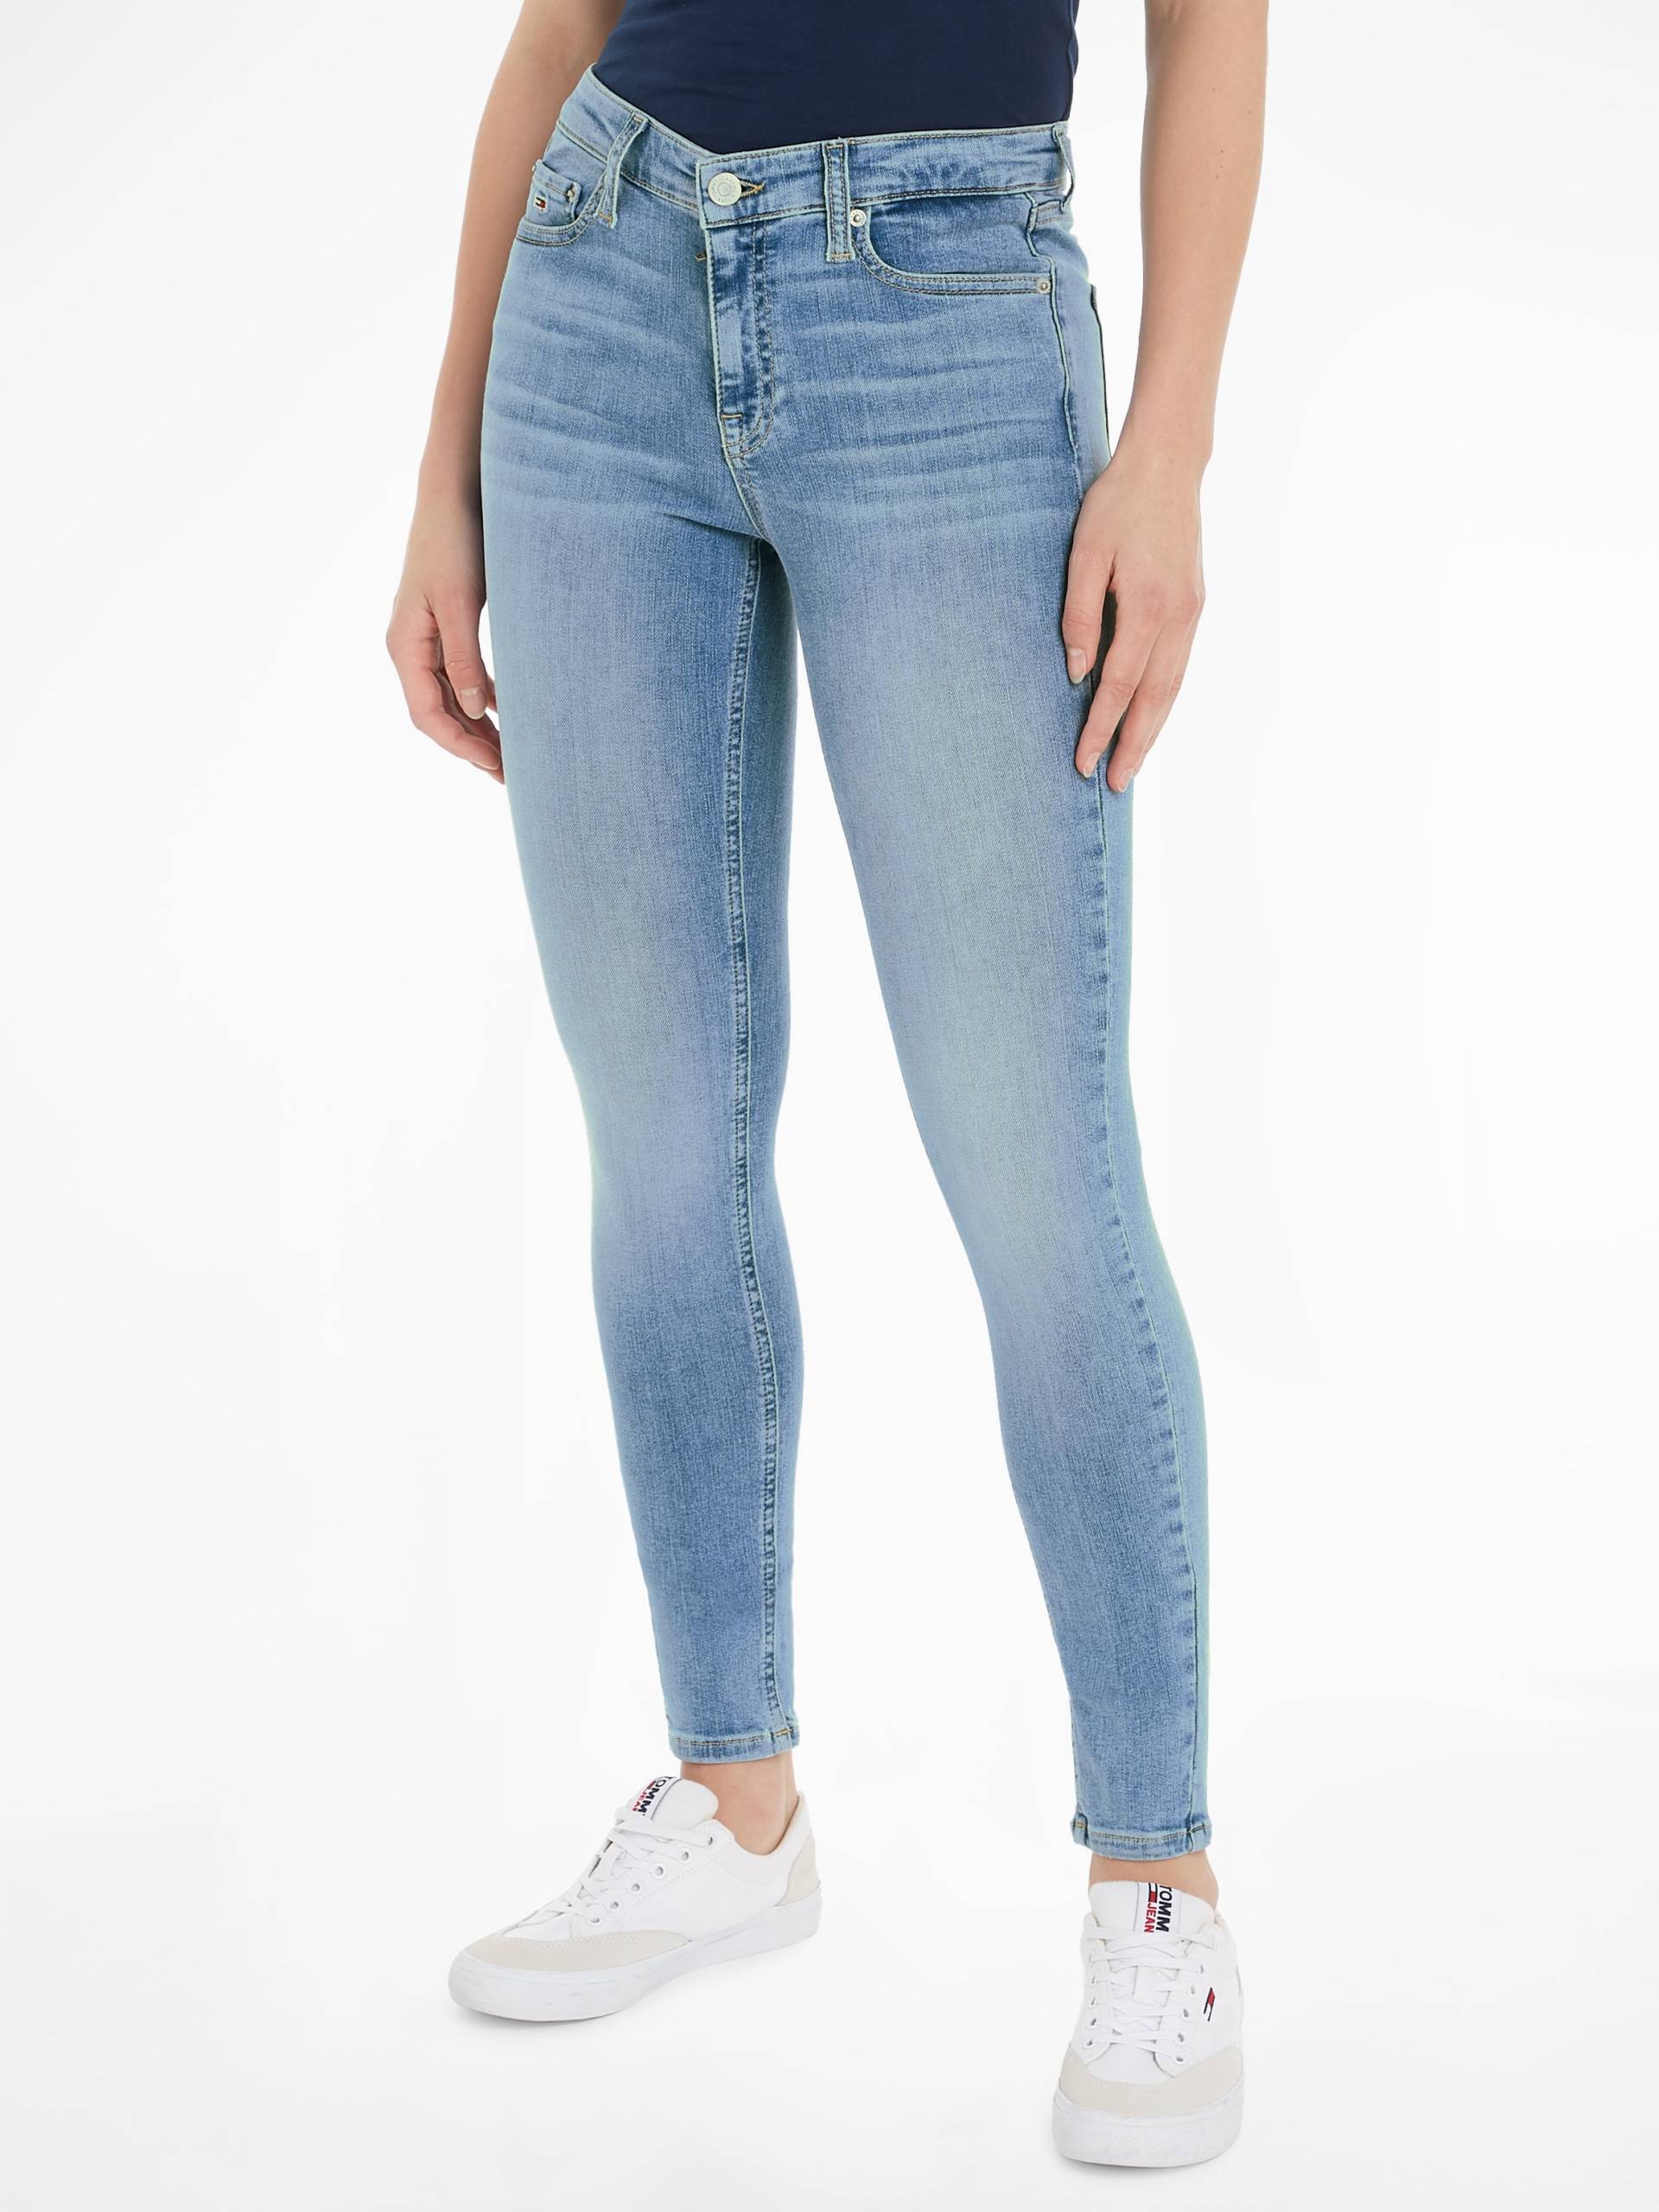 Tommy Jeans Skinny-fit-Jeans »Tommy Jeans - Damenjeans- NORA Mid Rise - Skinny Fit«, mit Waschung, Logo-Badge von Tommy Jeans